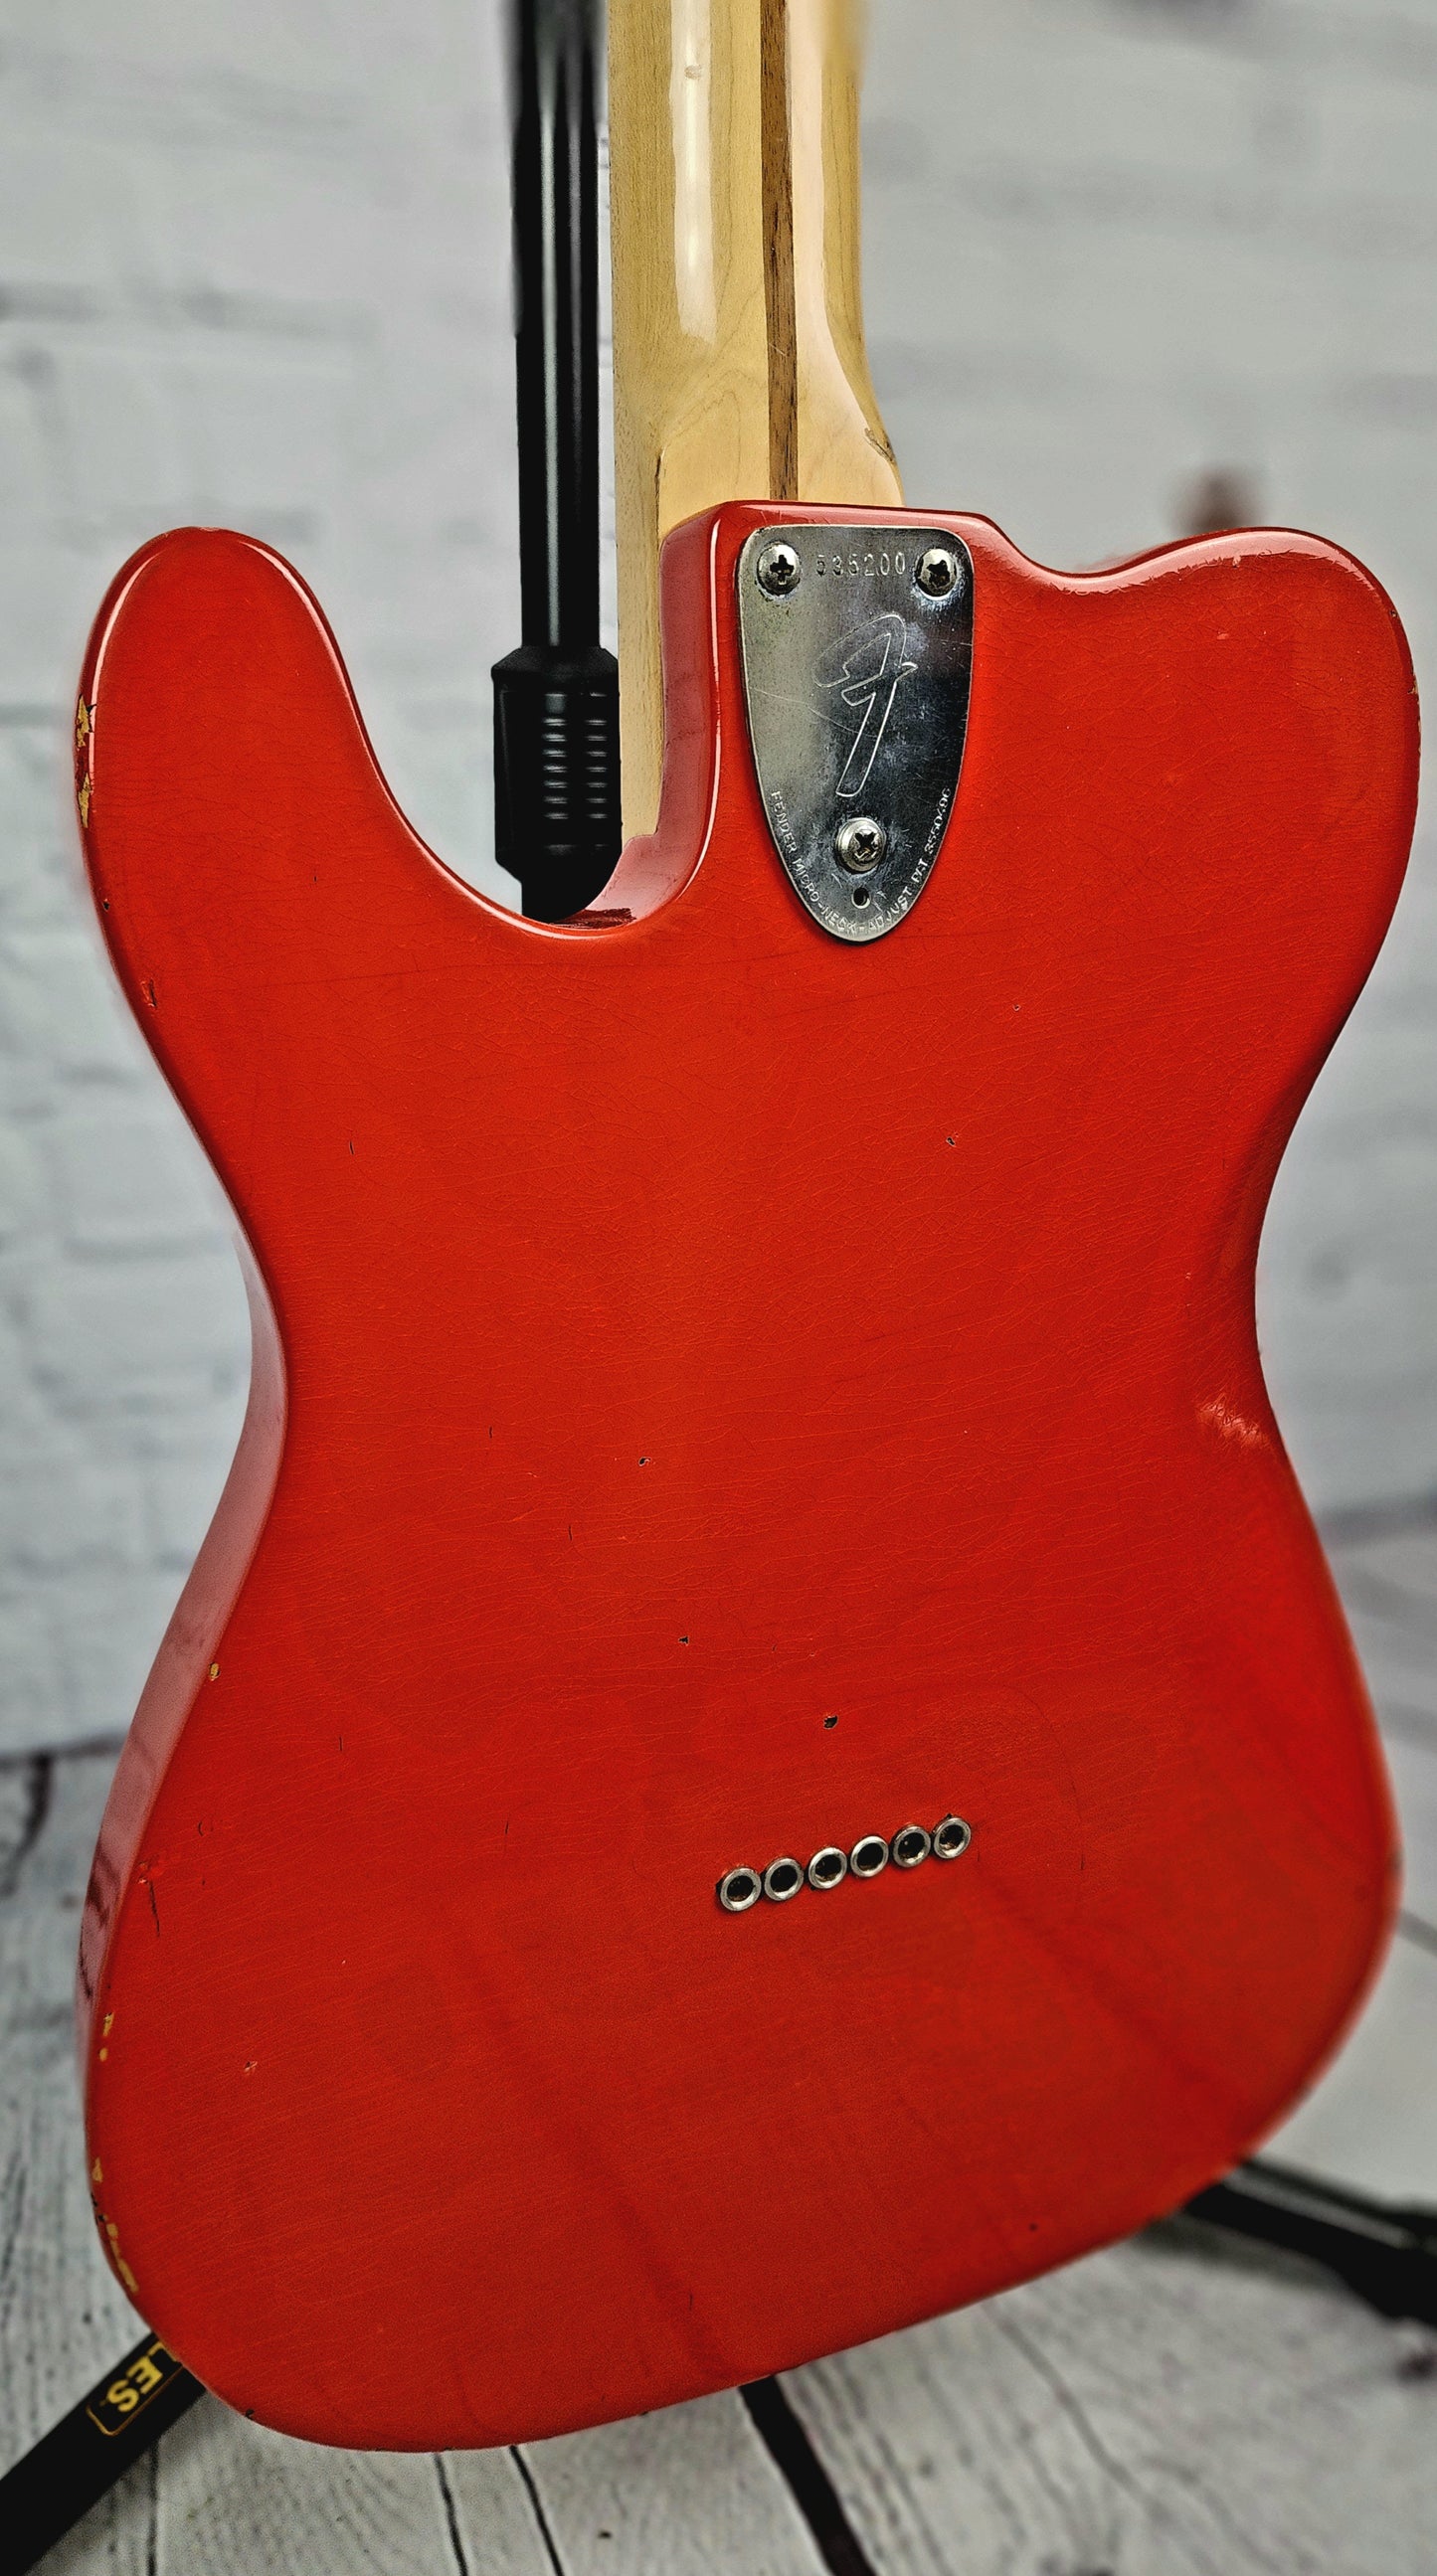 USED 1974 Fender Telecaster Deluxe Electric Guitar Refinish Fiesta Red